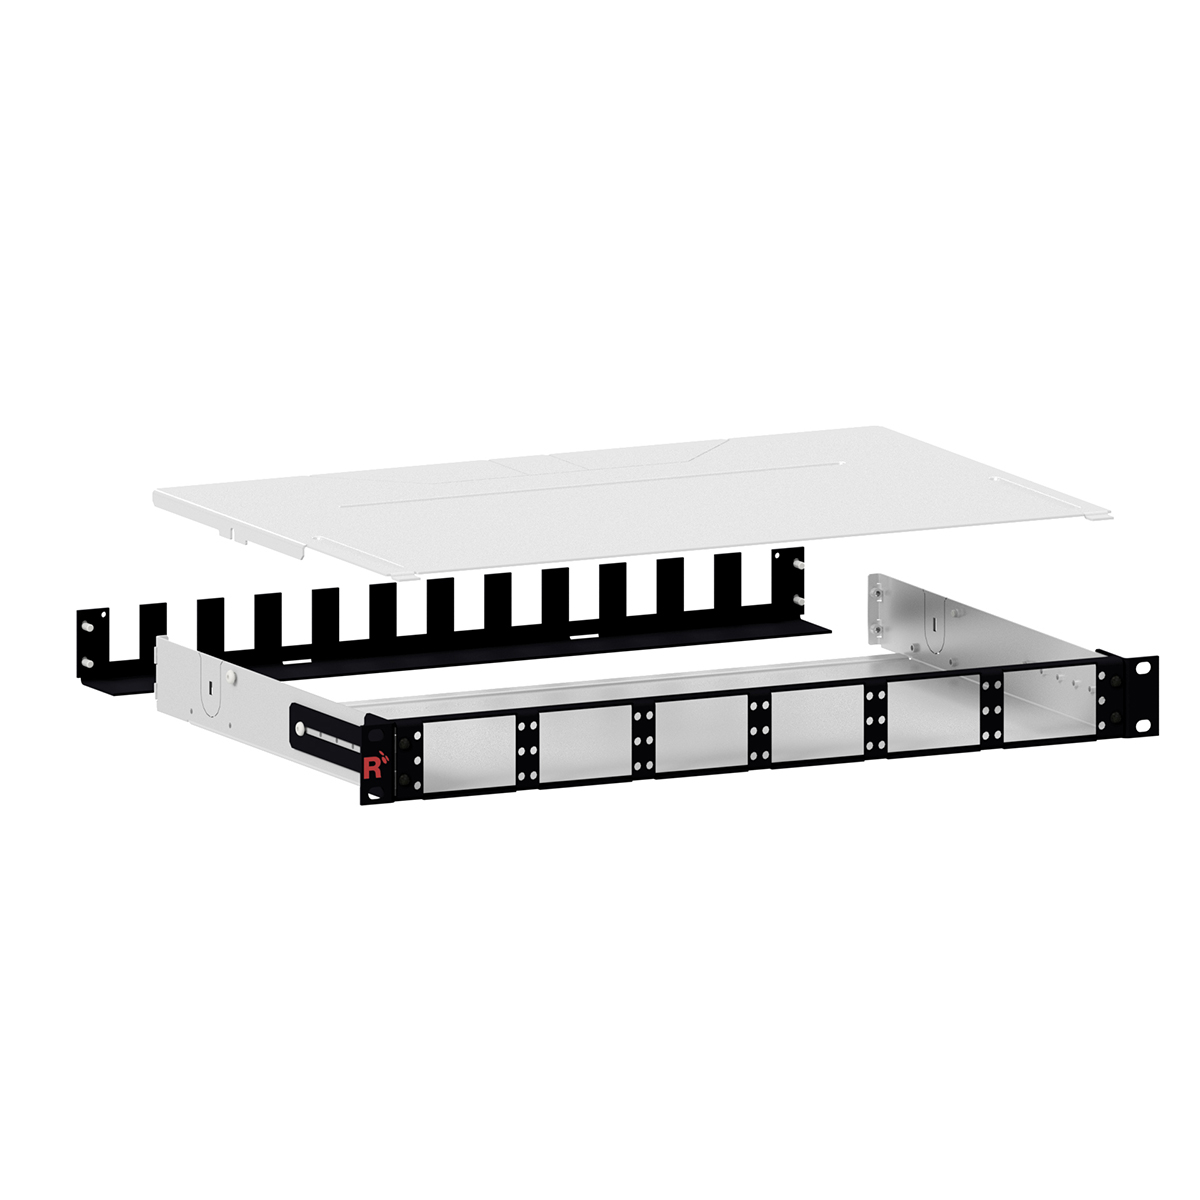 SMAP-G2 HD 19" 1HU empty distribution panels, RAL9005 black, back plane with 12 PreCONNECT® square interfaces, 6/6 widths partition, depth 300 mm